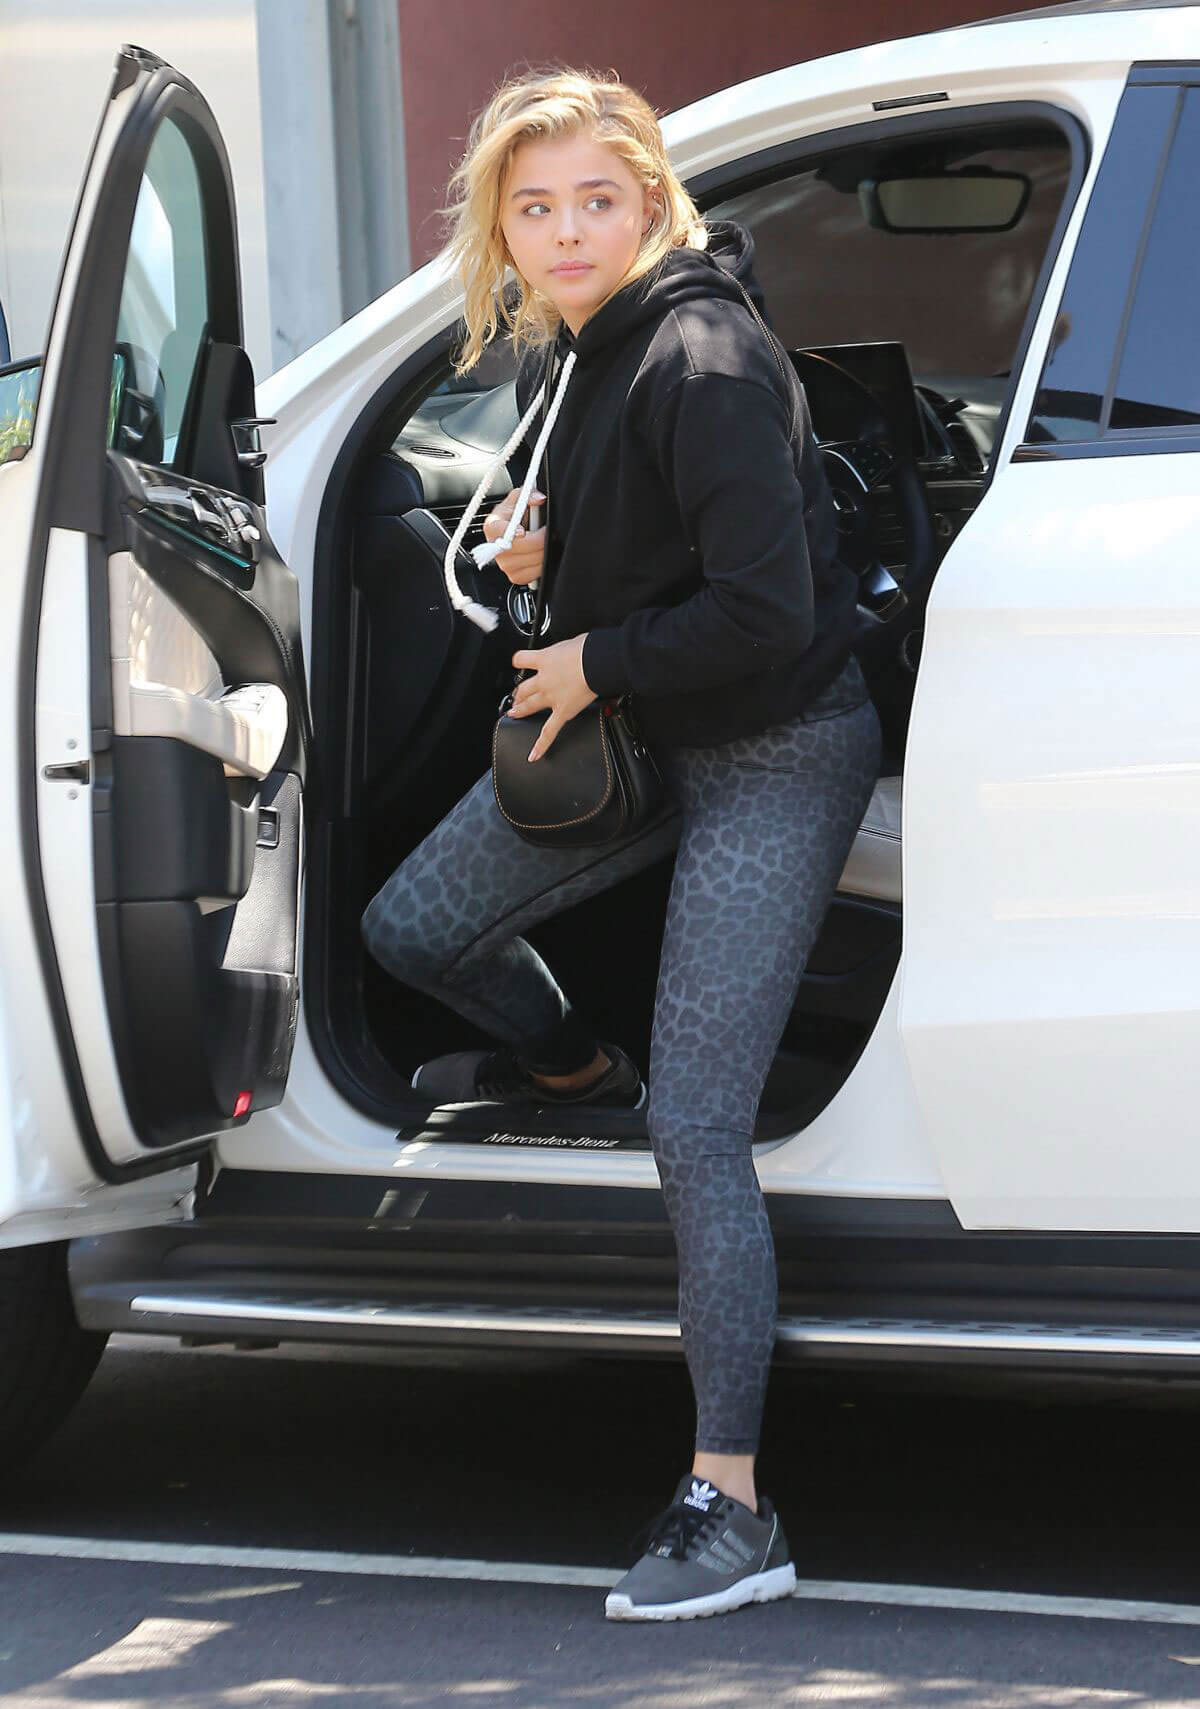 Chloe Moretz Arrives to Pilates Class in West Hollywood - 14/09/2016 1